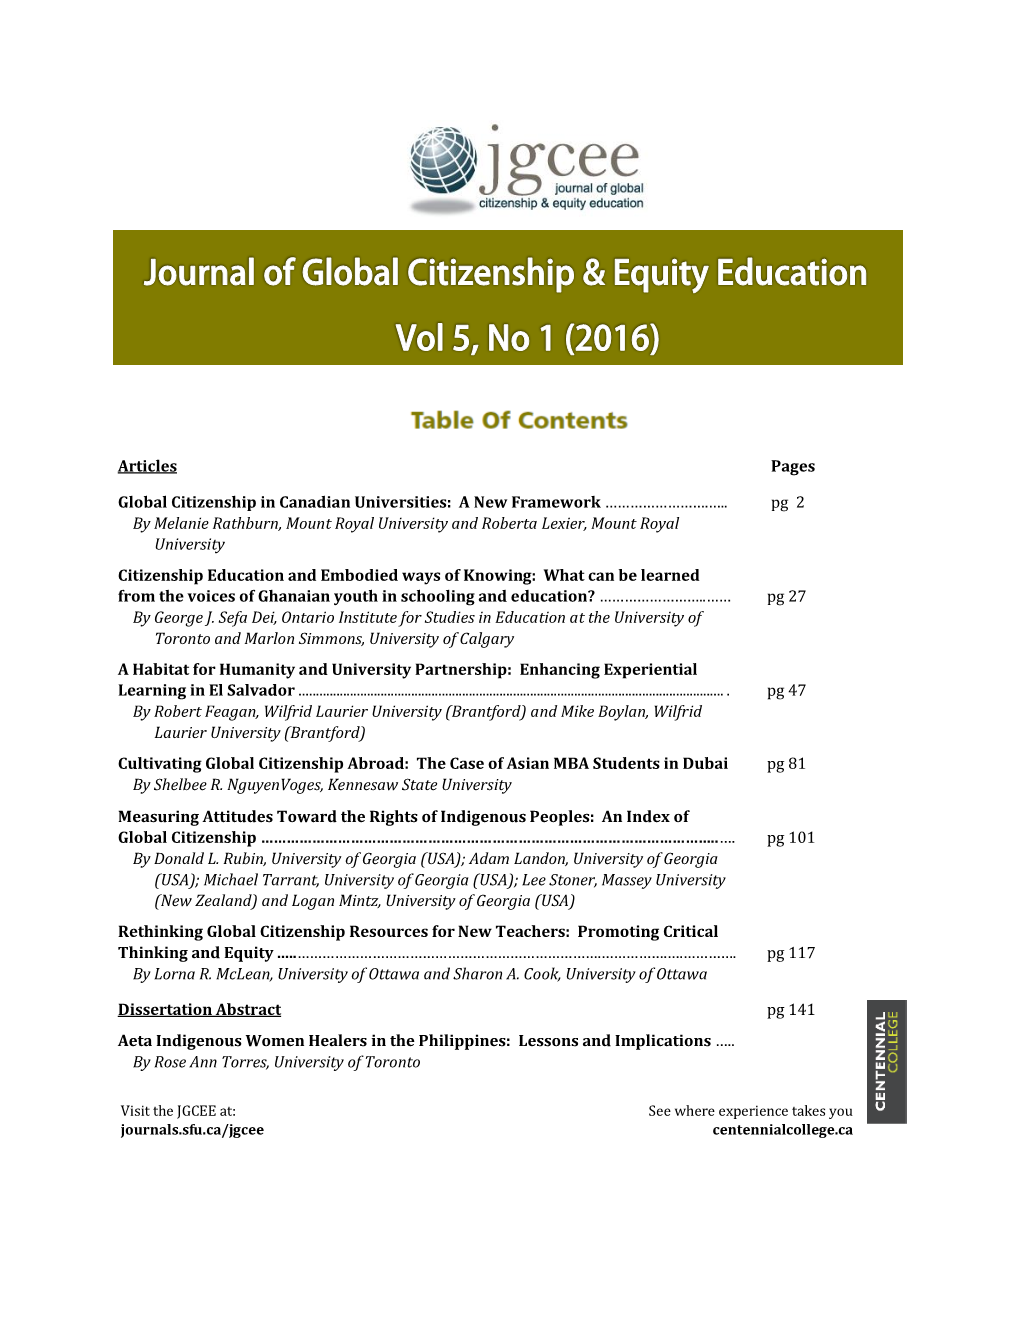 Articles Pages Global Citizenship in Canadian Universities: a New Framework …………………….….. by Melanie Rathburn